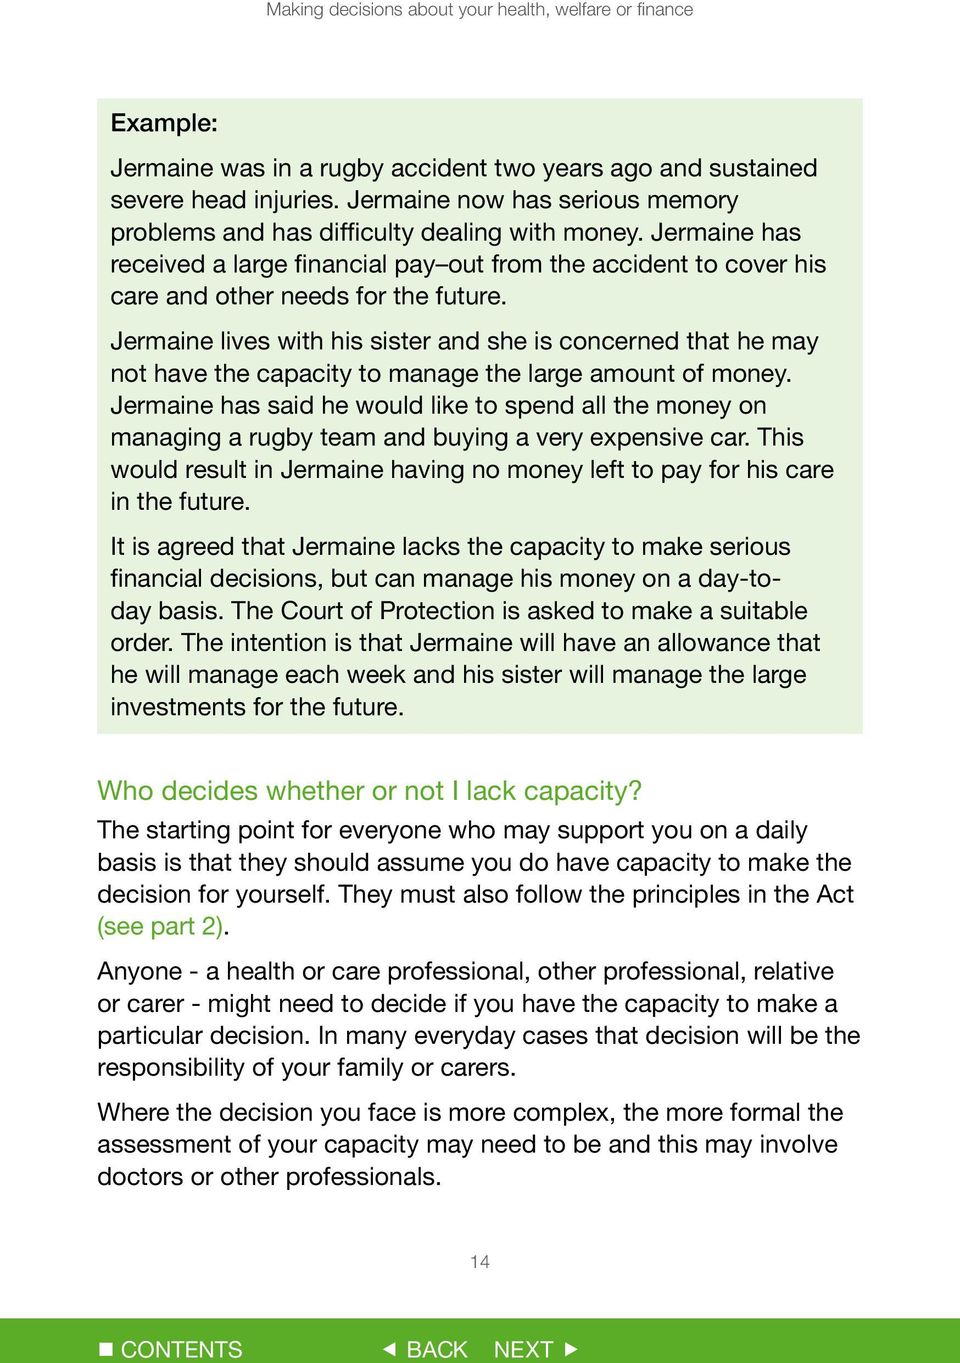 Jermaine lives with his sister and she is concerned that he may not have the capacity to manage the large amount of money.